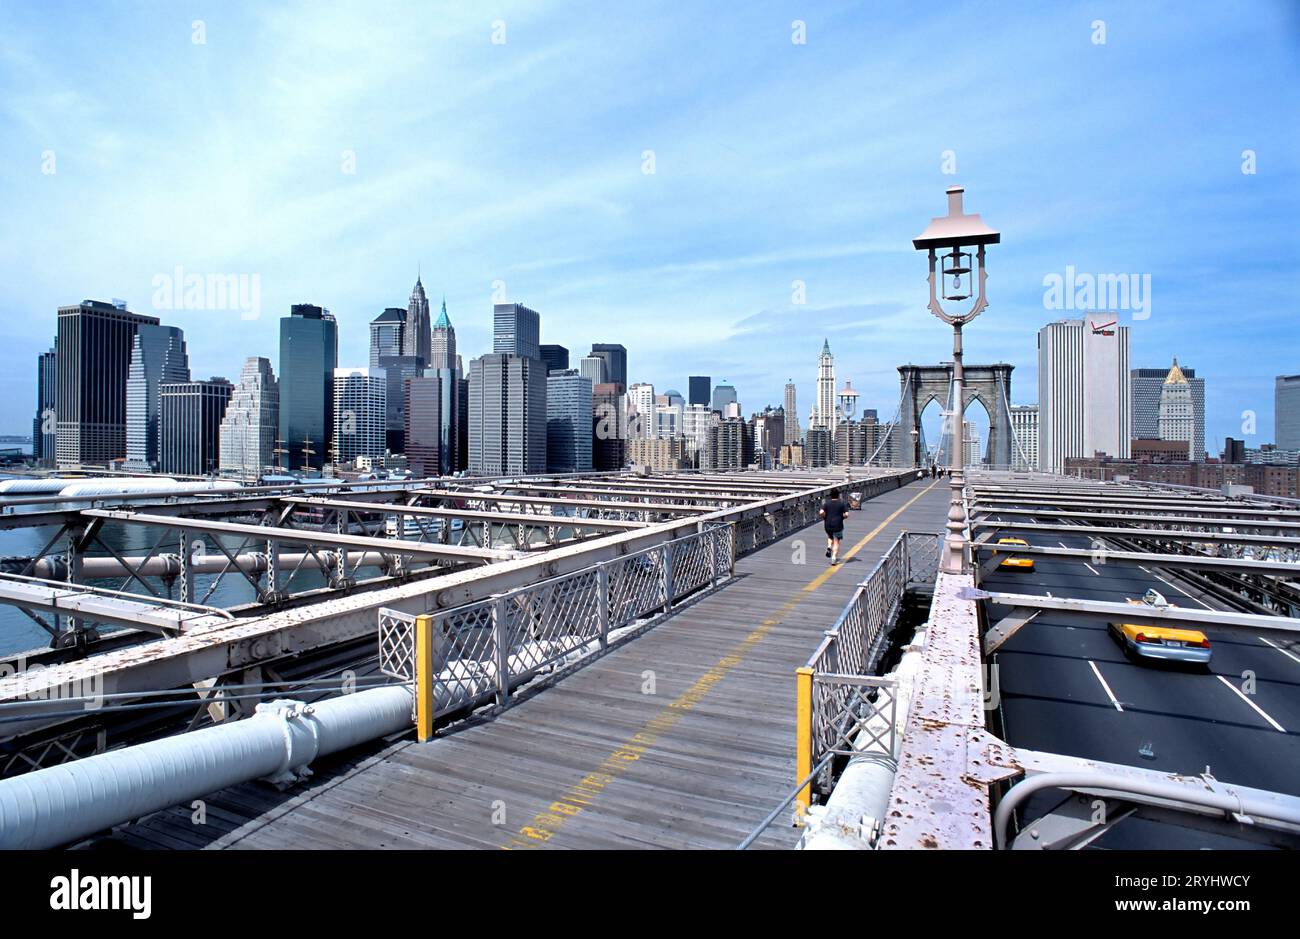 Panorama of Manhattan without the World Trade Center towers seen from Brooklyn Bridge, New York City, USA Stock Photo